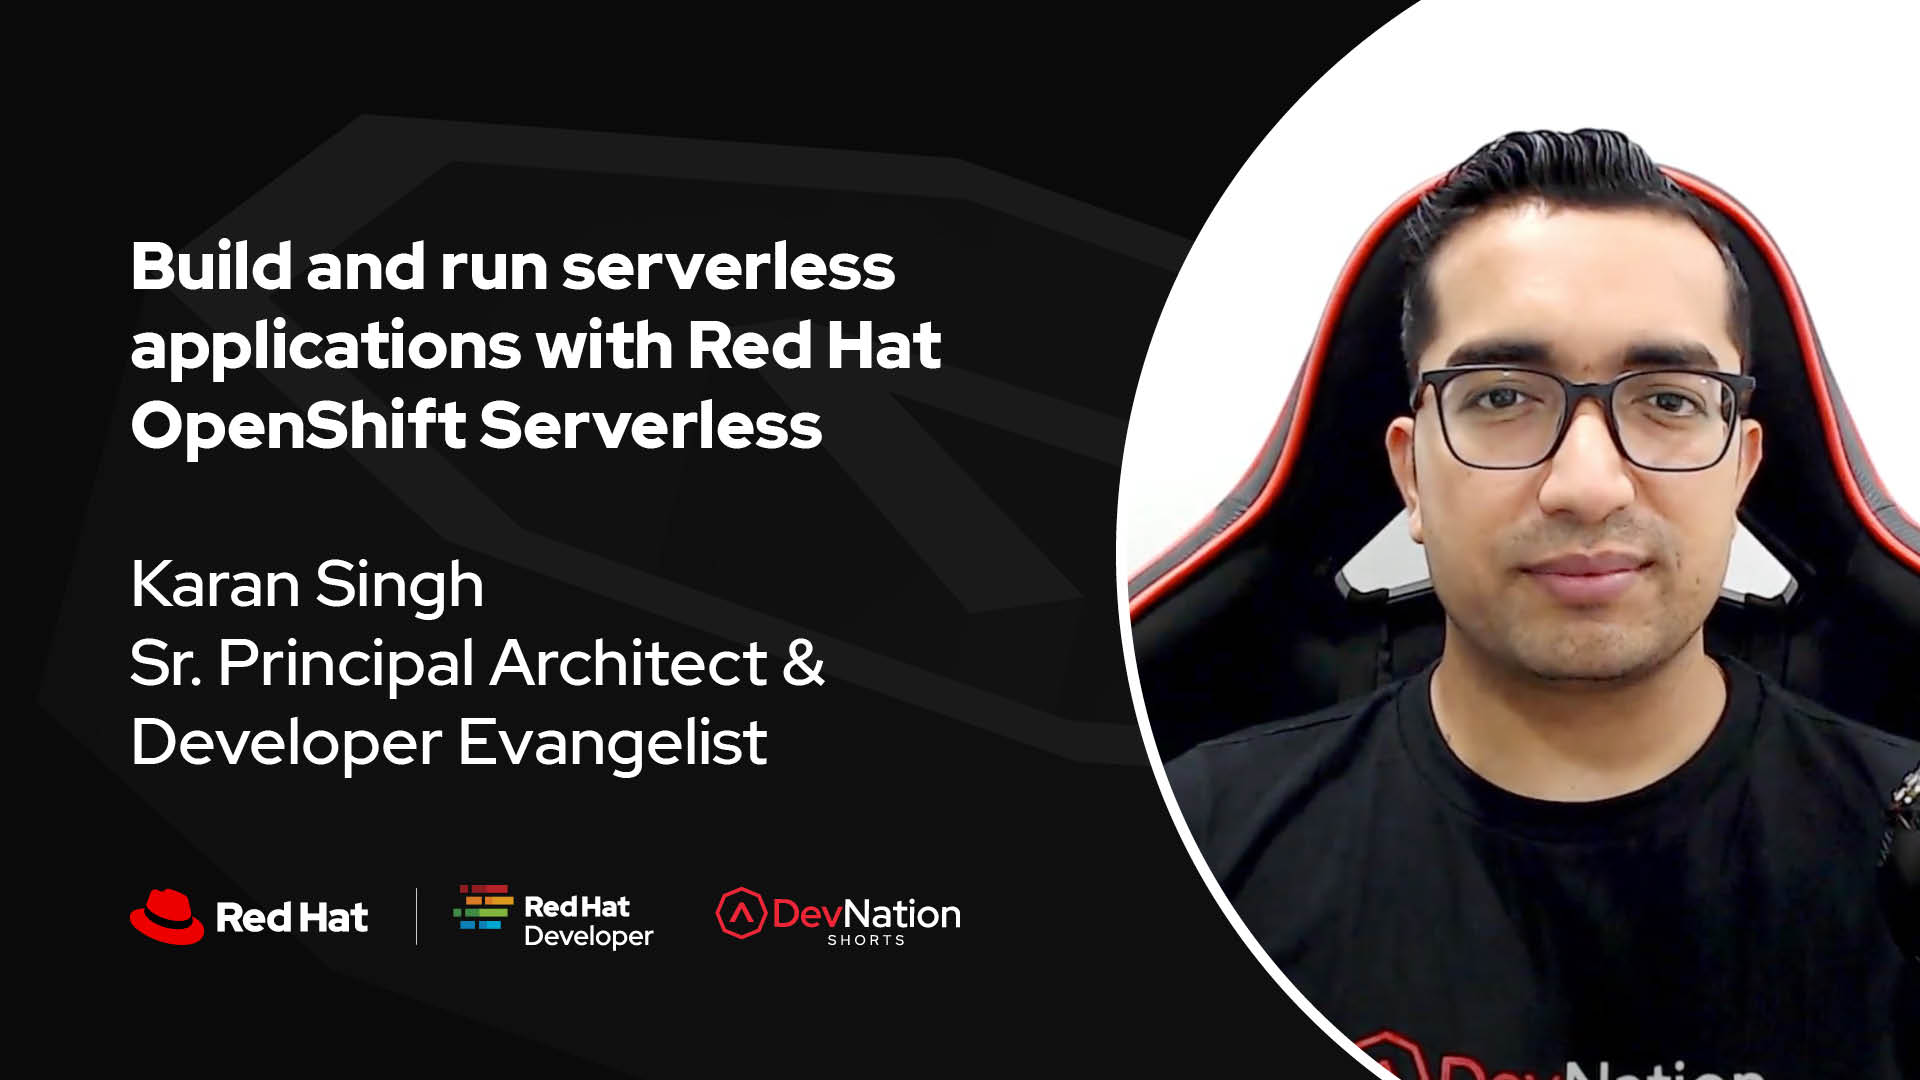 Build and run serverless applications with Red Hat OpenShift Serverless